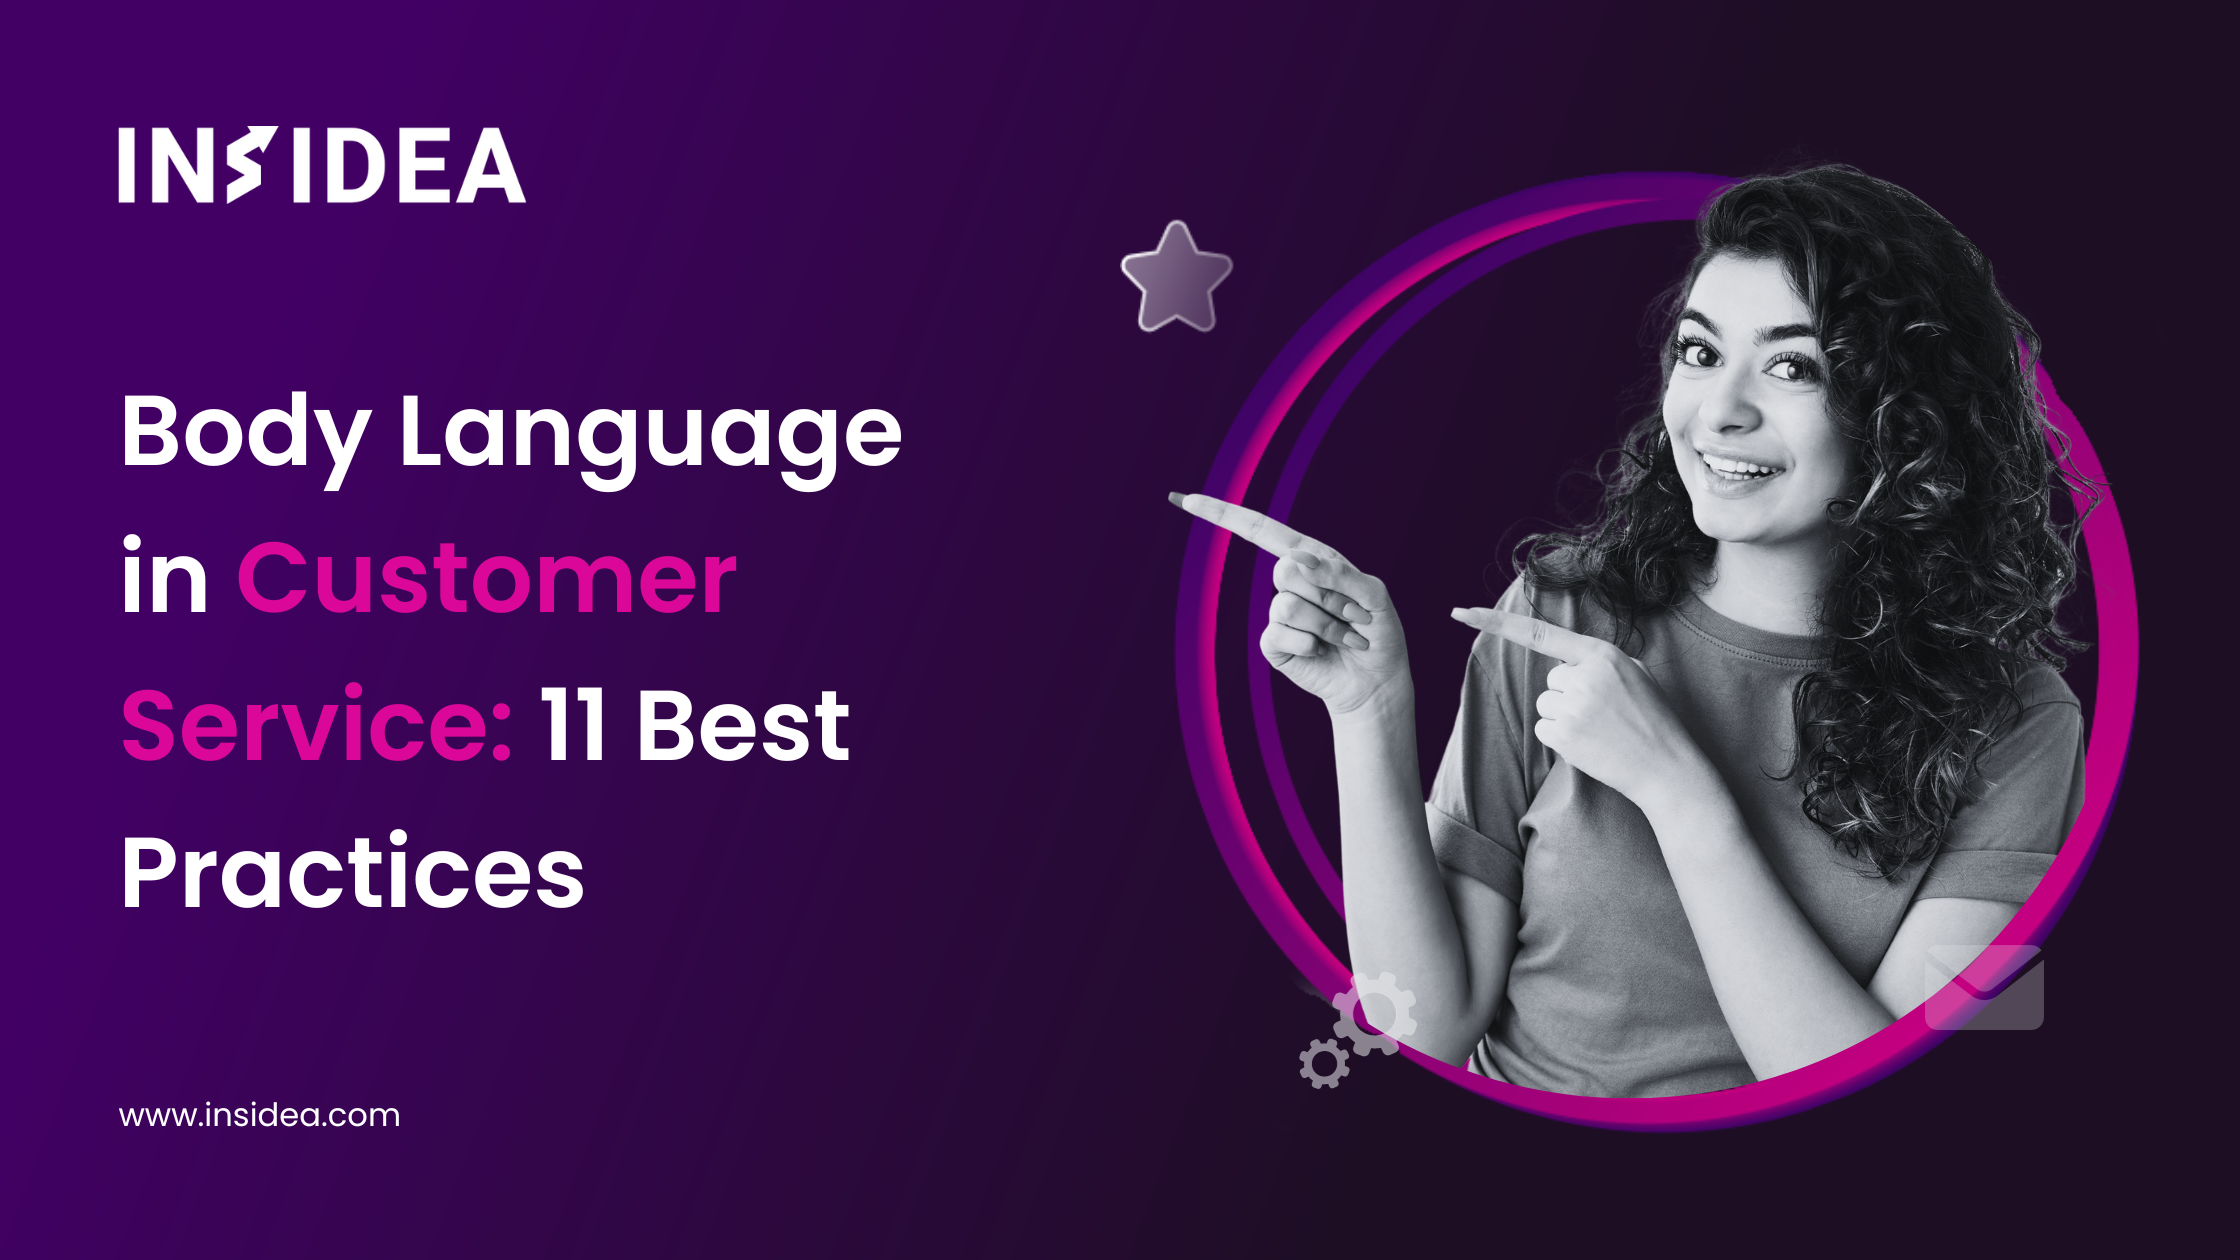 Body Language in Customer Service 11 Best Practices